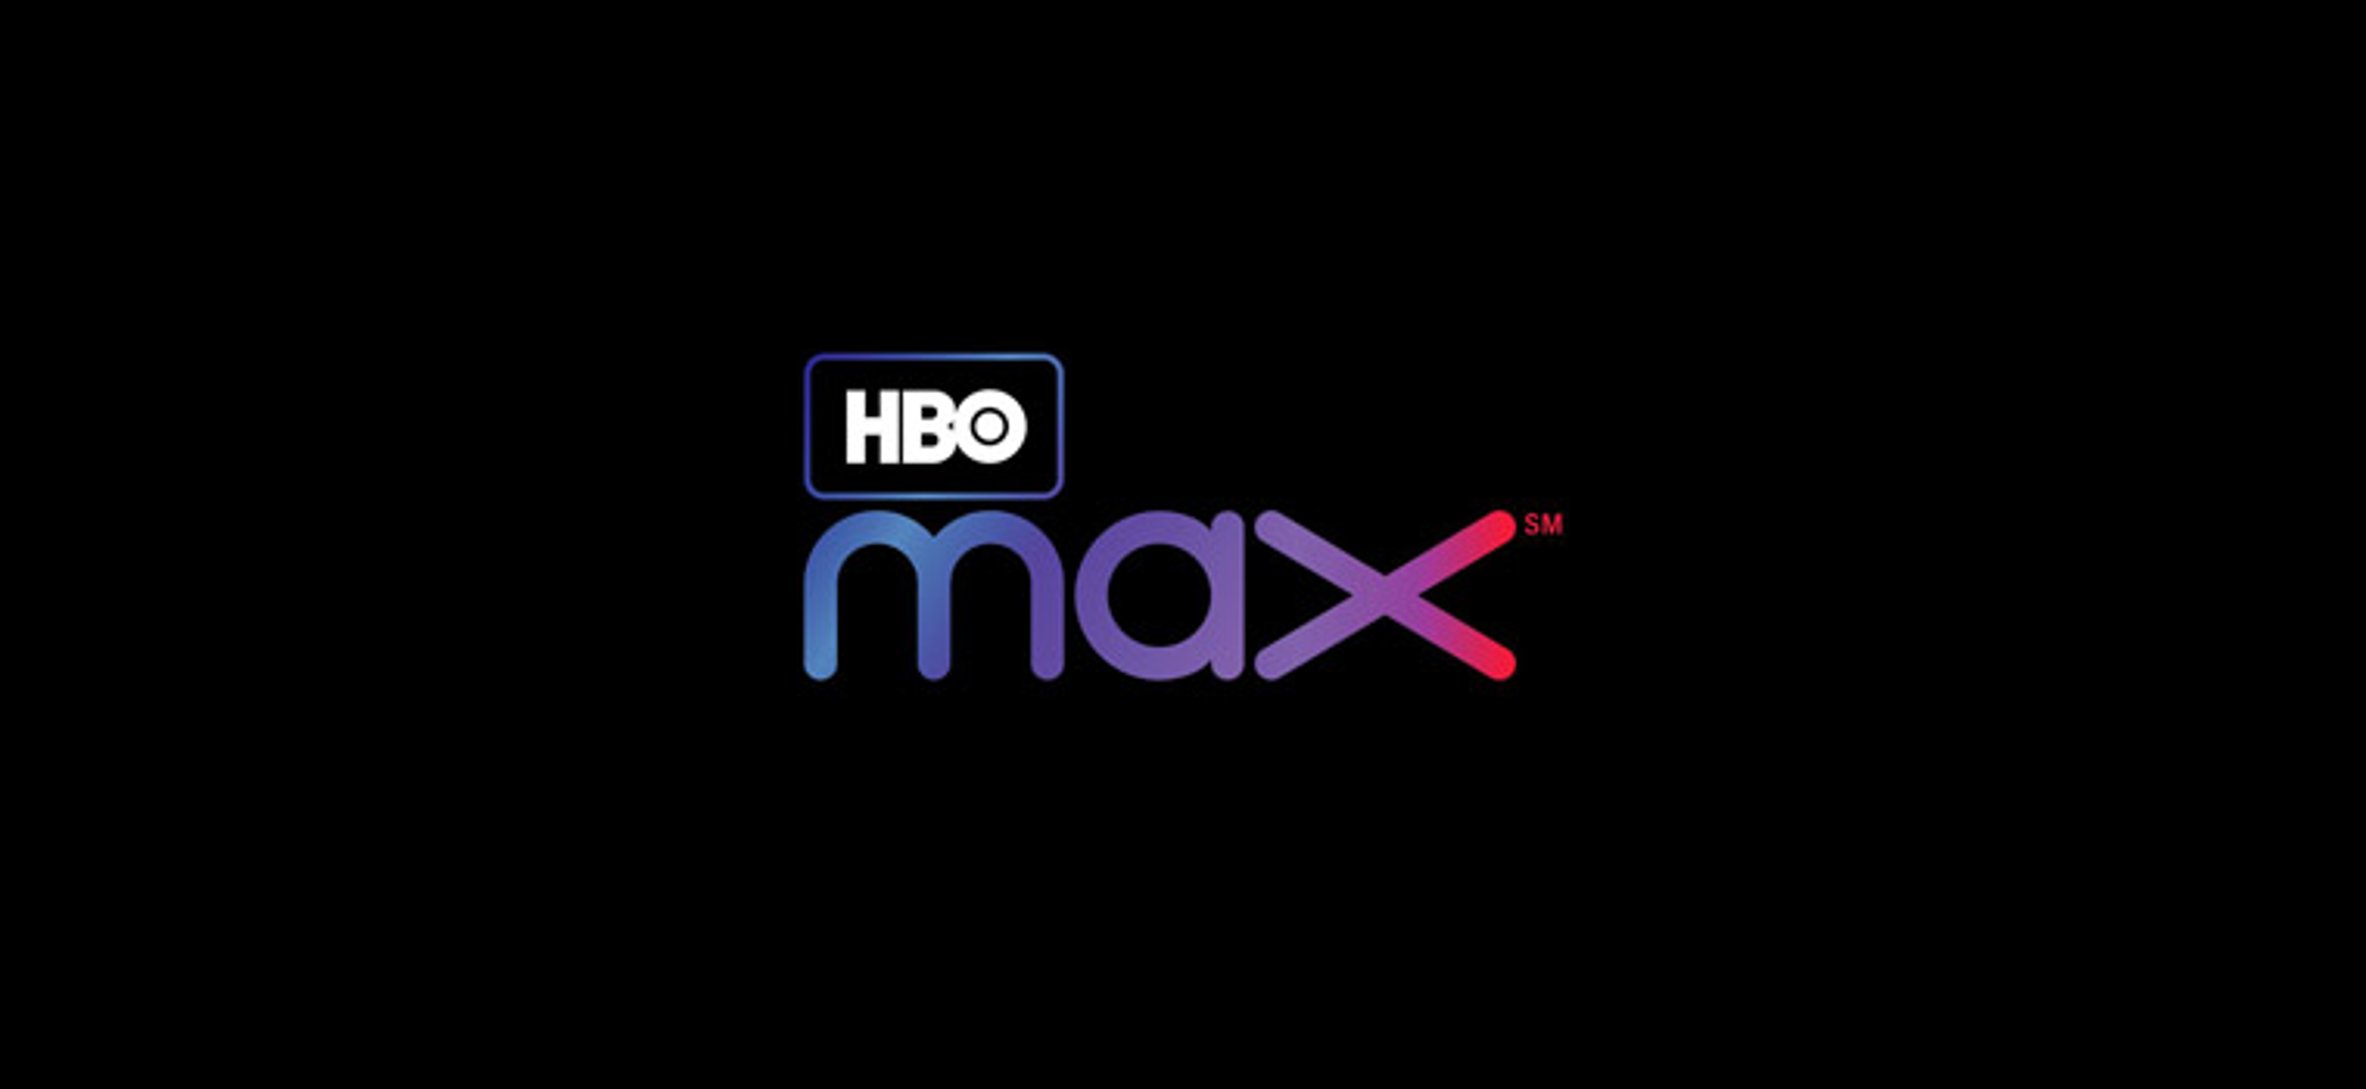 Seeking an experienced DJ with their own equipment to work as a specialty extra on the HBO Max Limited Series Staircase in Rave scenes filming in Atlanta, GA.